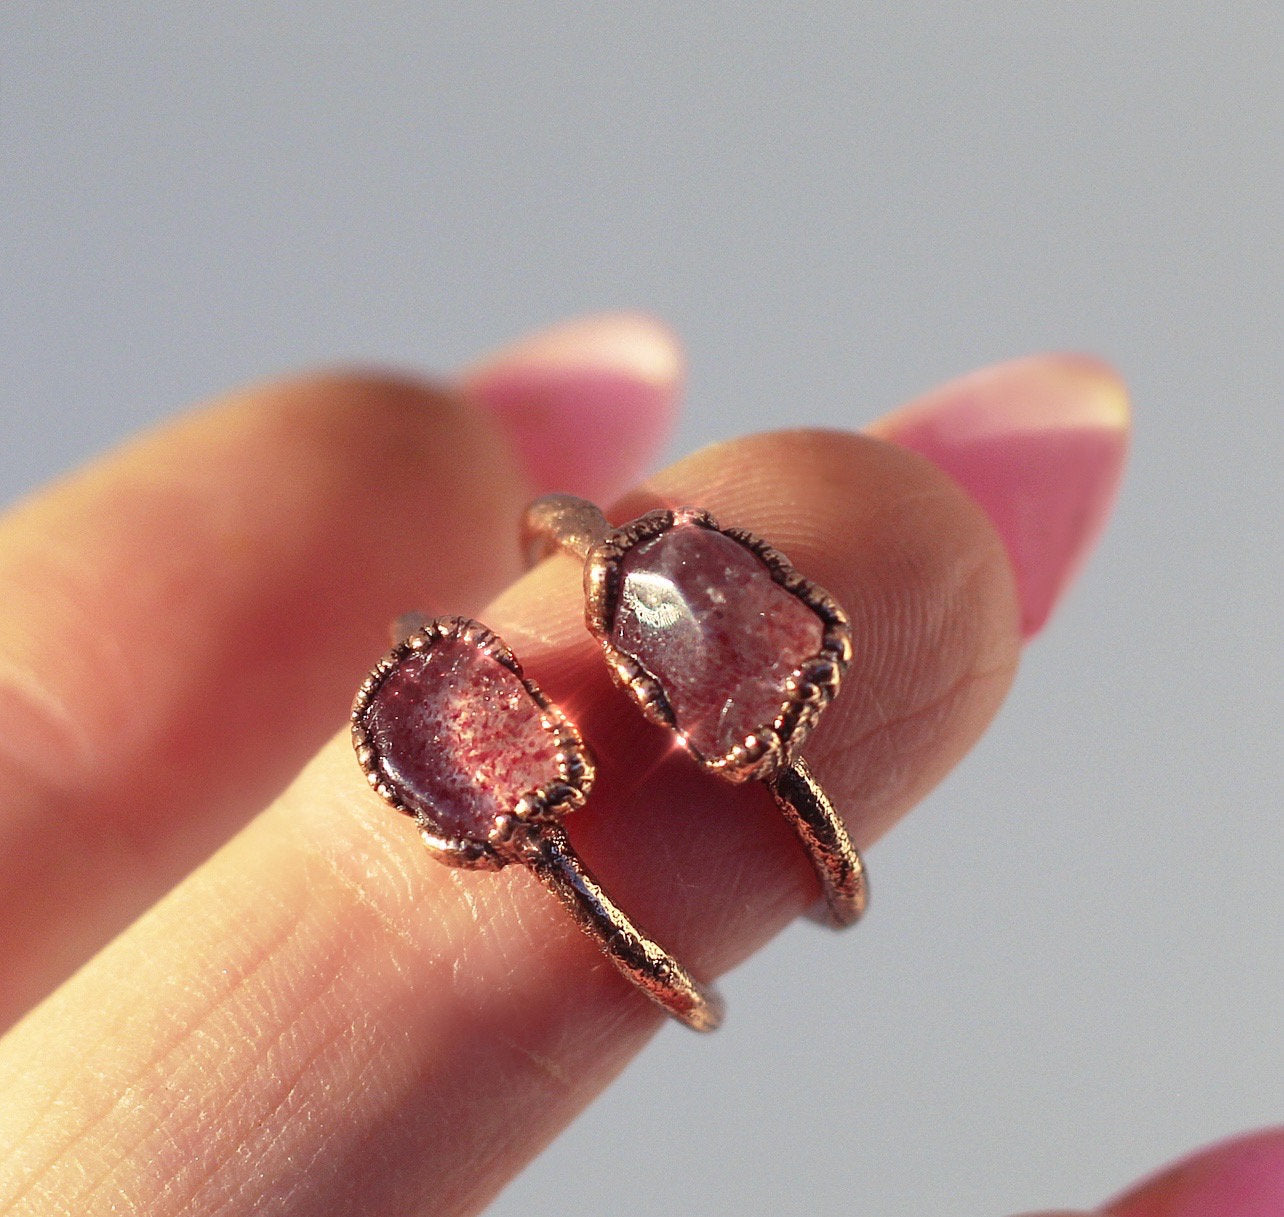 Handcrafted Strawberry Quartz Ring, Copper Setting, Natural Pink Gemstone, Unique Gift for Her, Healing Crystal Jewelry, Boho Chic Style